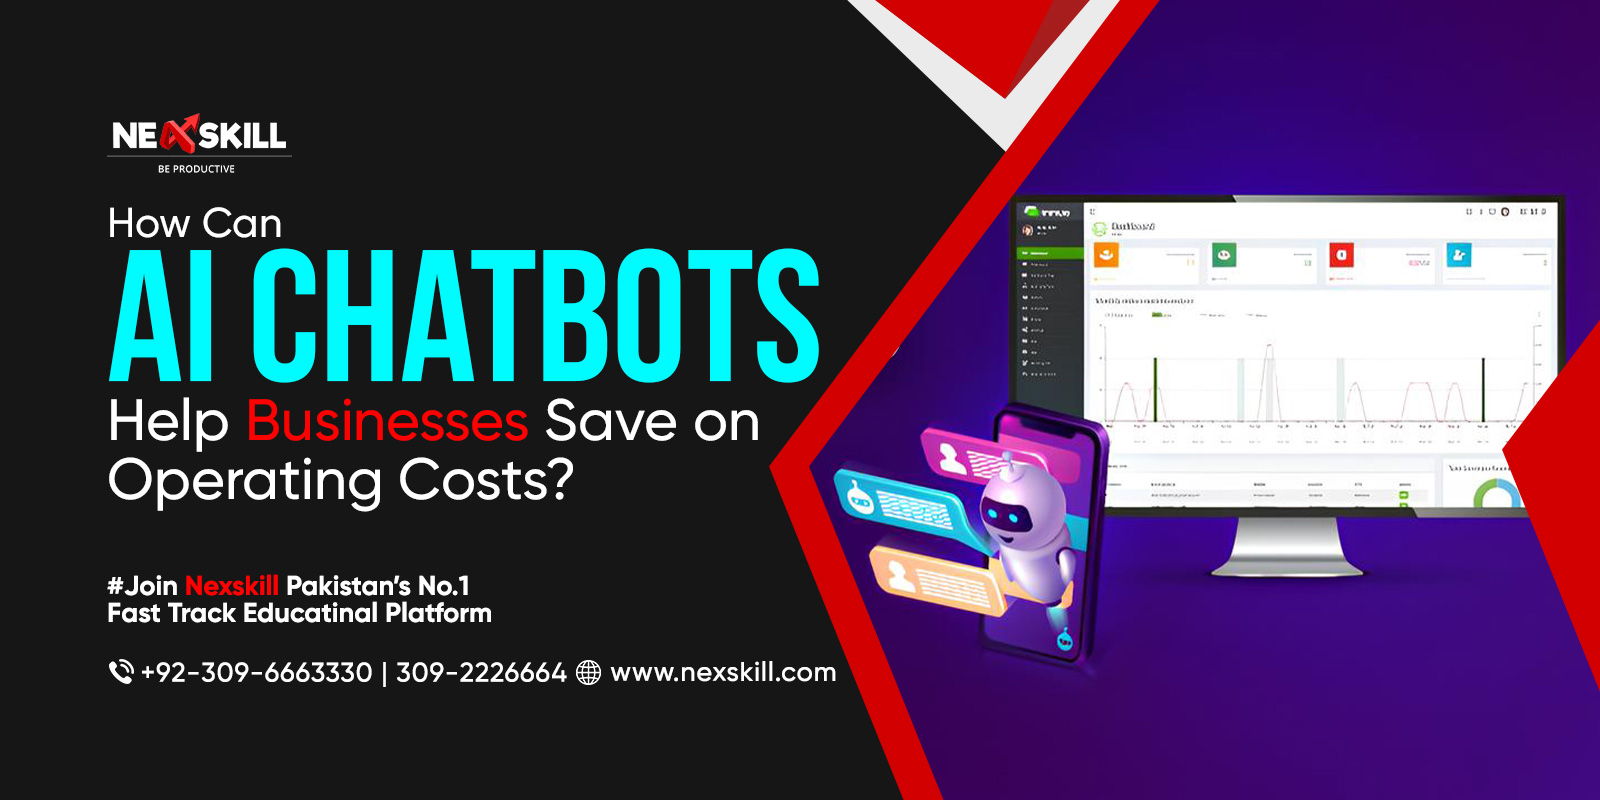 How Can AI Chatbots Help Businesses Save on Operating Costs?